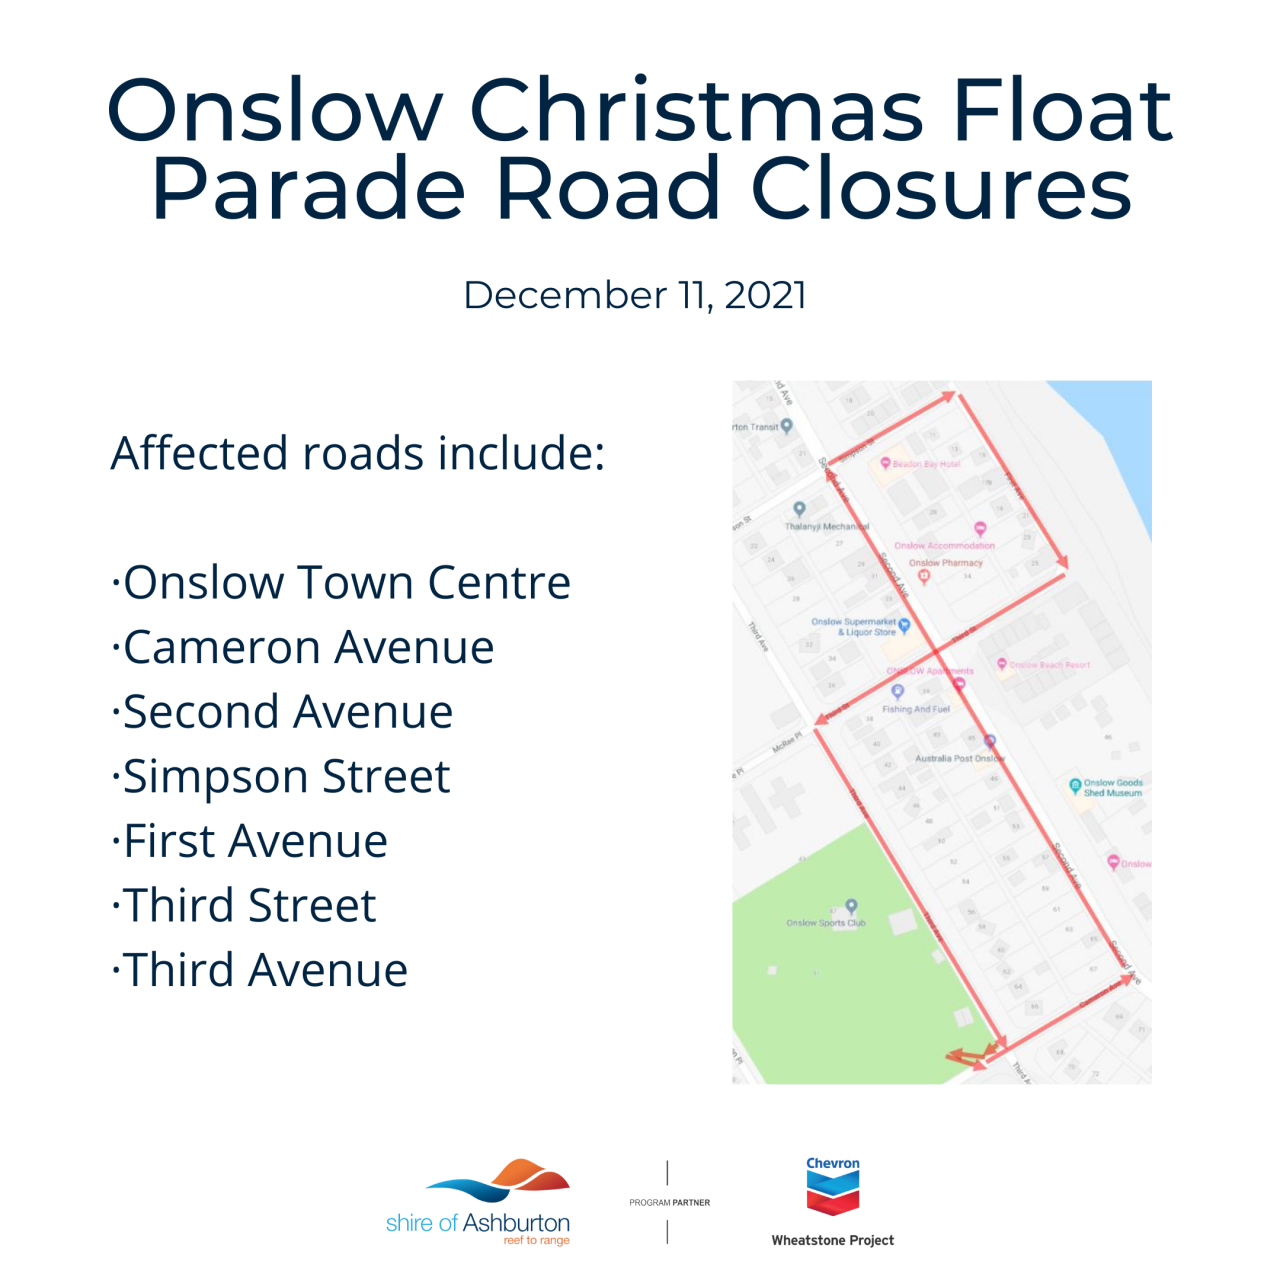 Road closures due to Onslow Christmas Float Parade